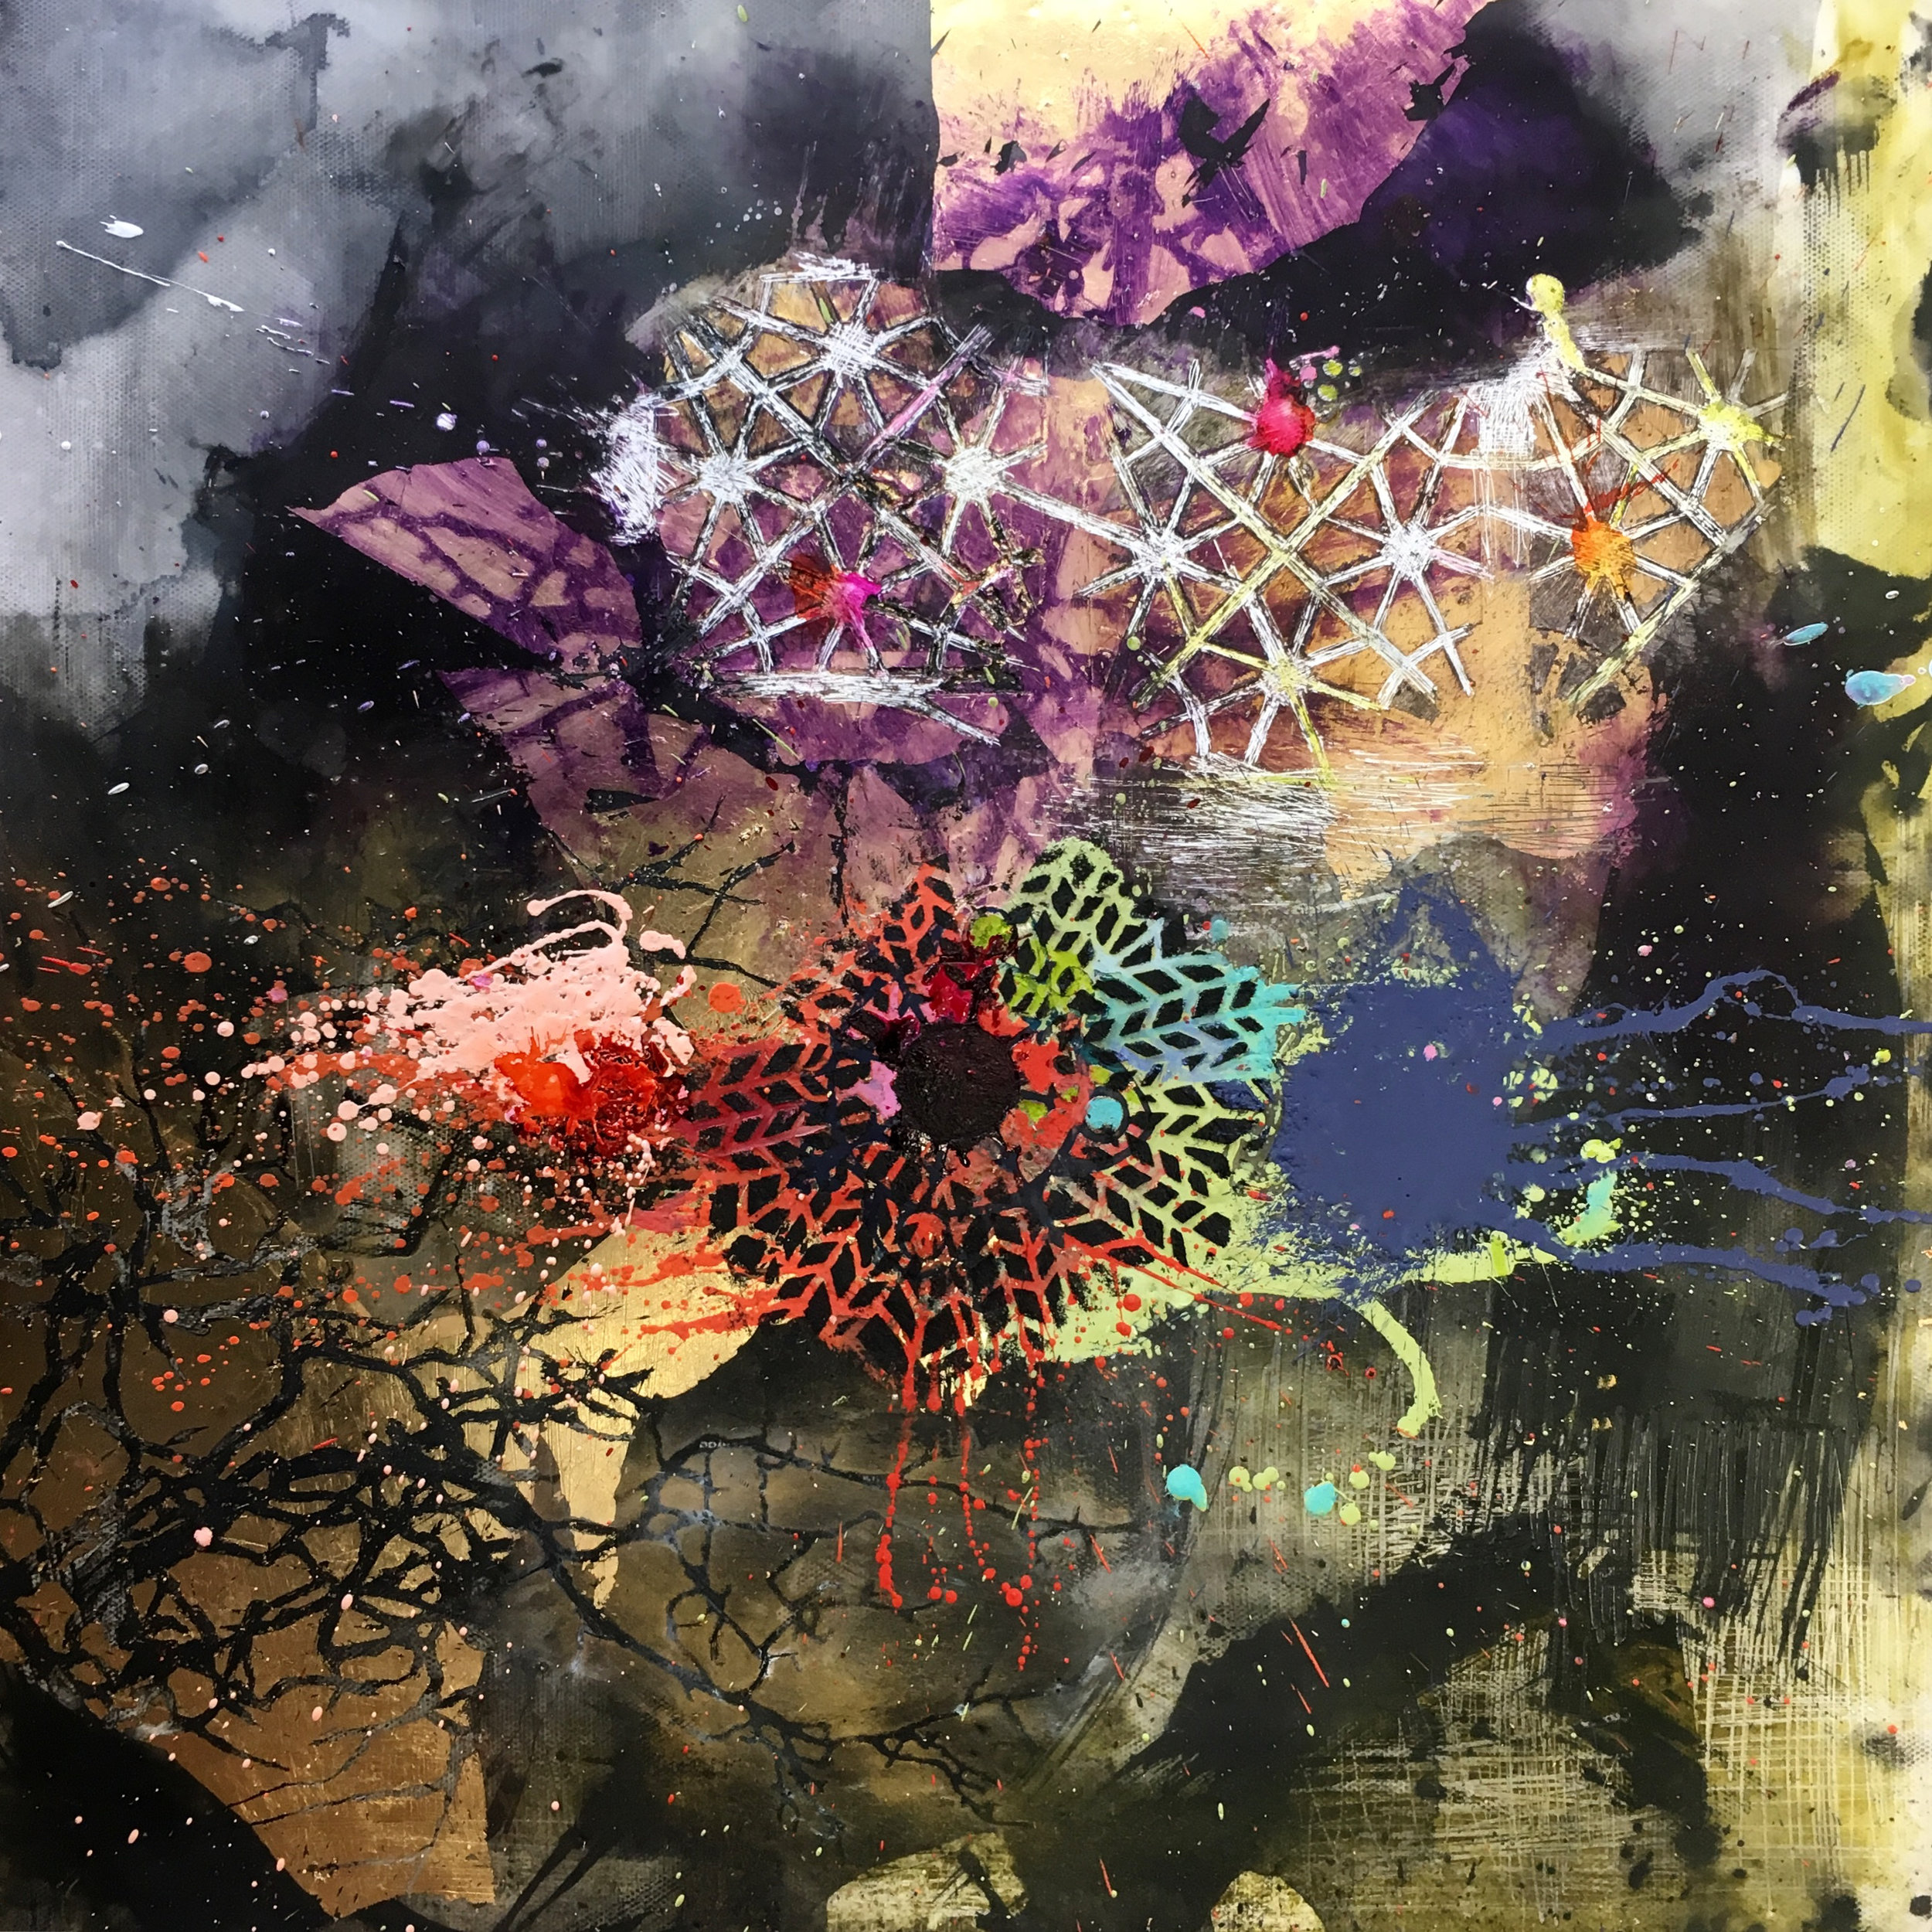  Mary Marley,  Attention Intention,  Encaustic Paint 